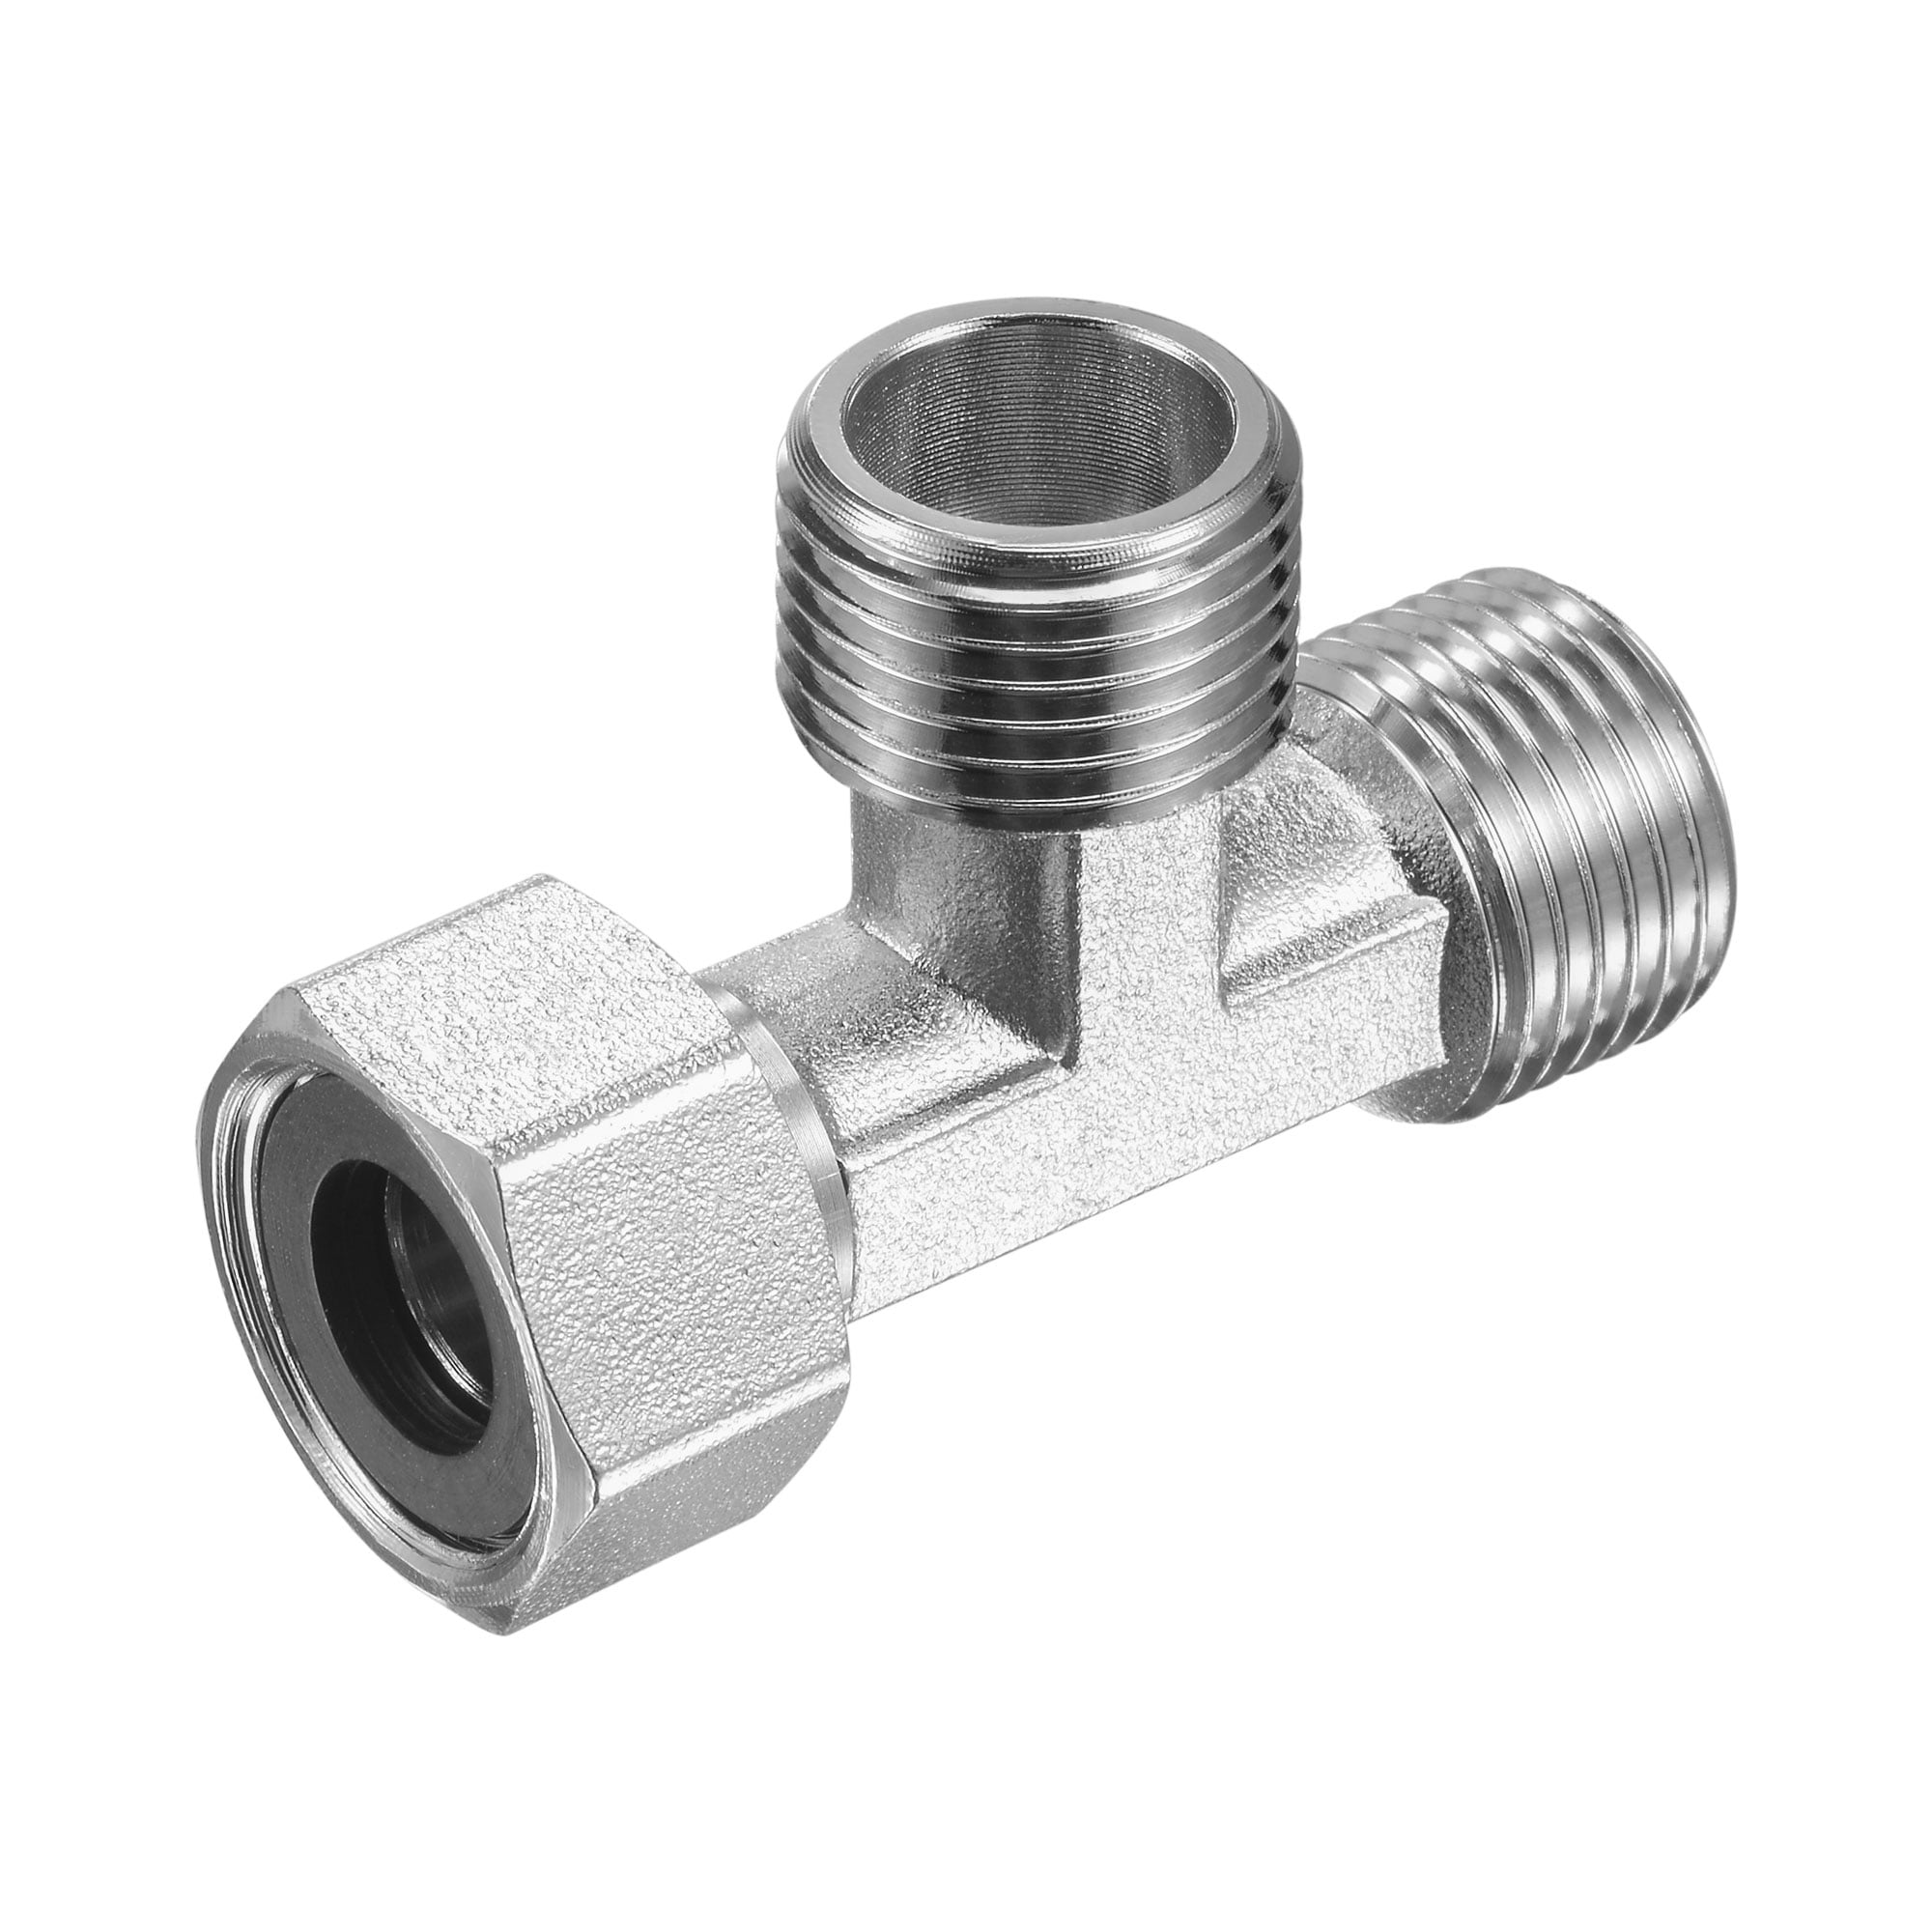 Size : 1/4 ADUCI 2pcs 1/8 1/4 3 Way Brass Hose Tube Fitting Female and Male Run Tee Joint with NPT Thread 